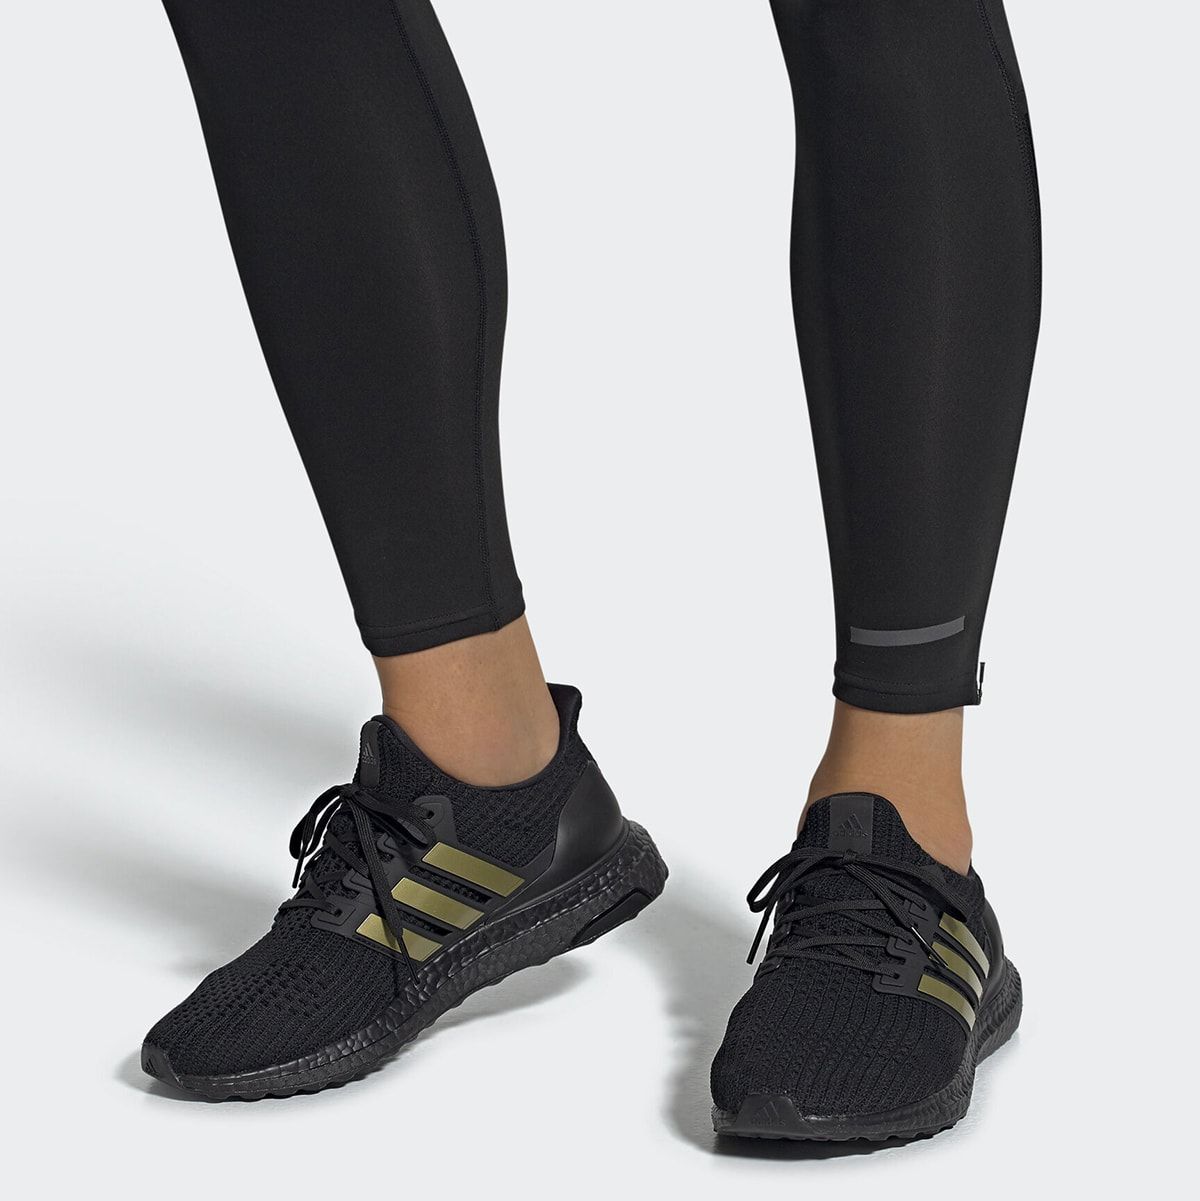 ultra boost 4.0 black and gold